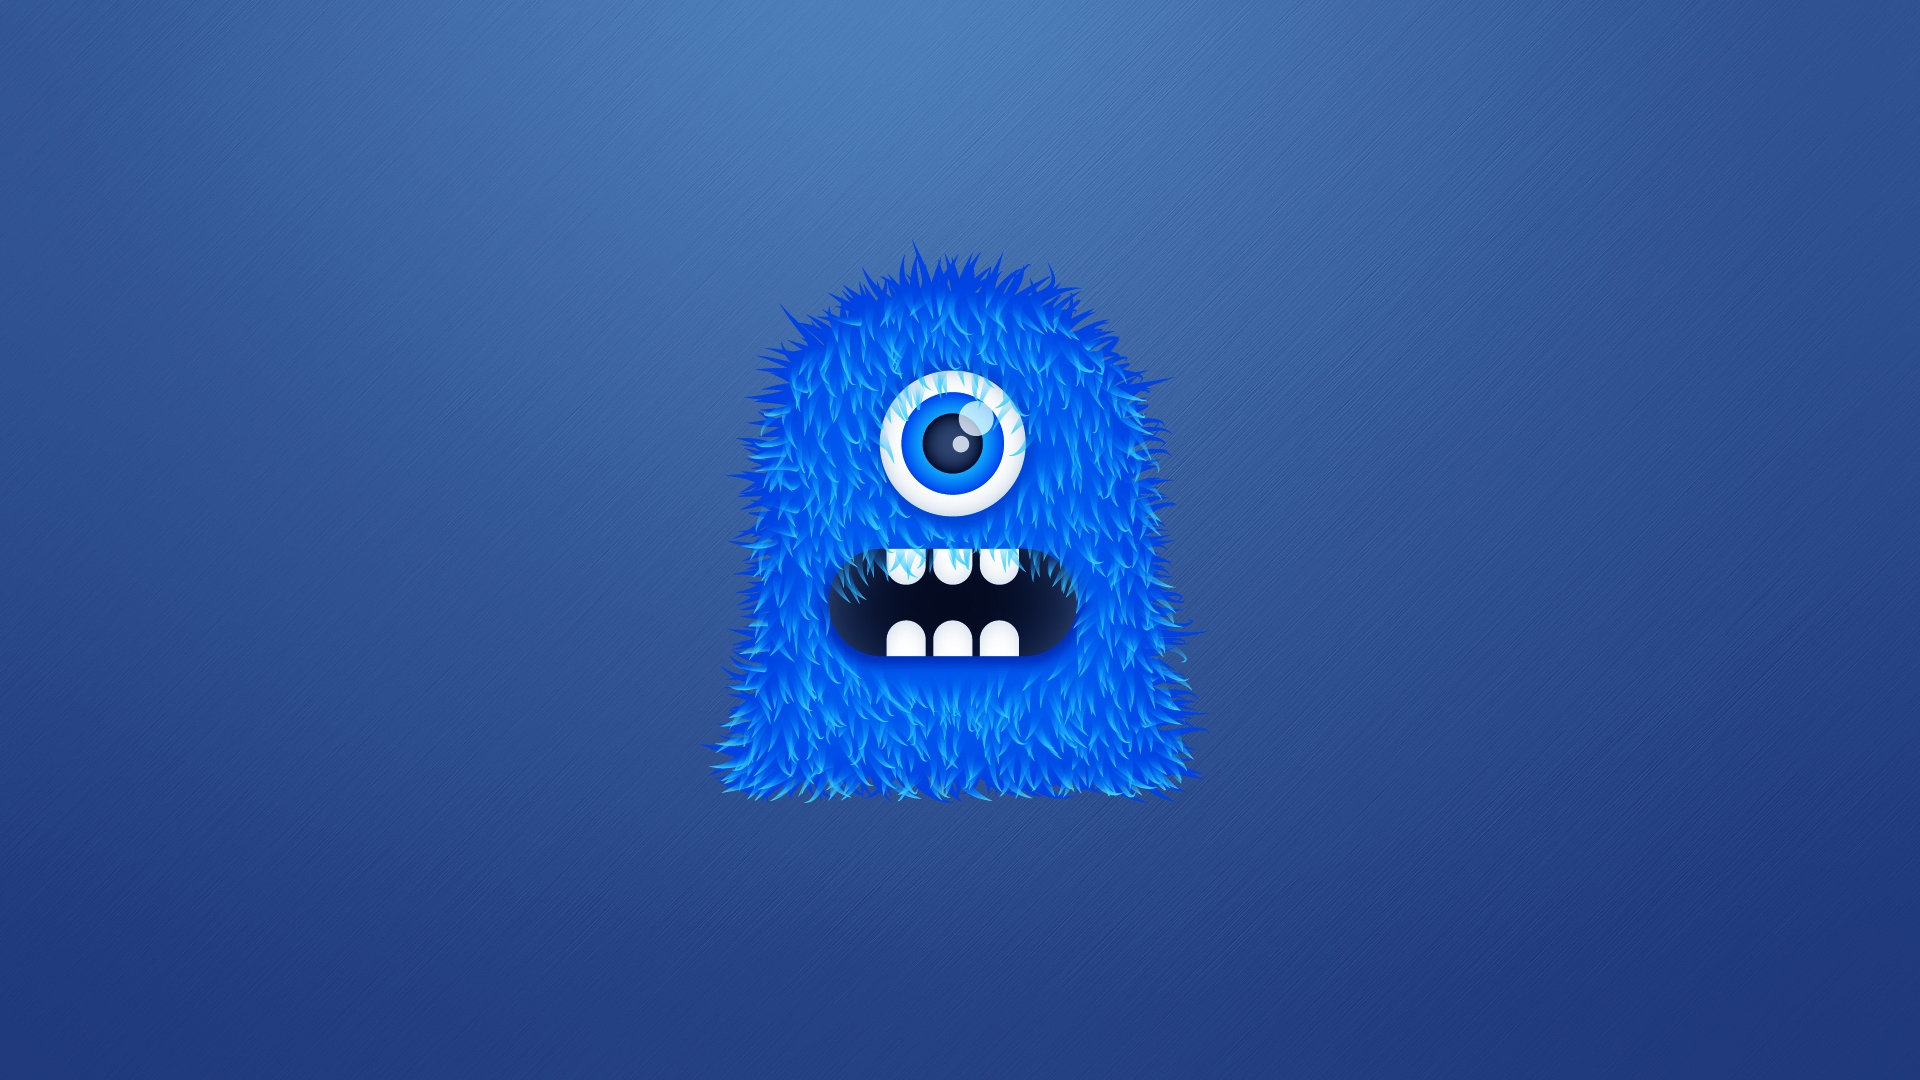 Mascot Scared for 1920 x 1080 HDTV 1080p resolution